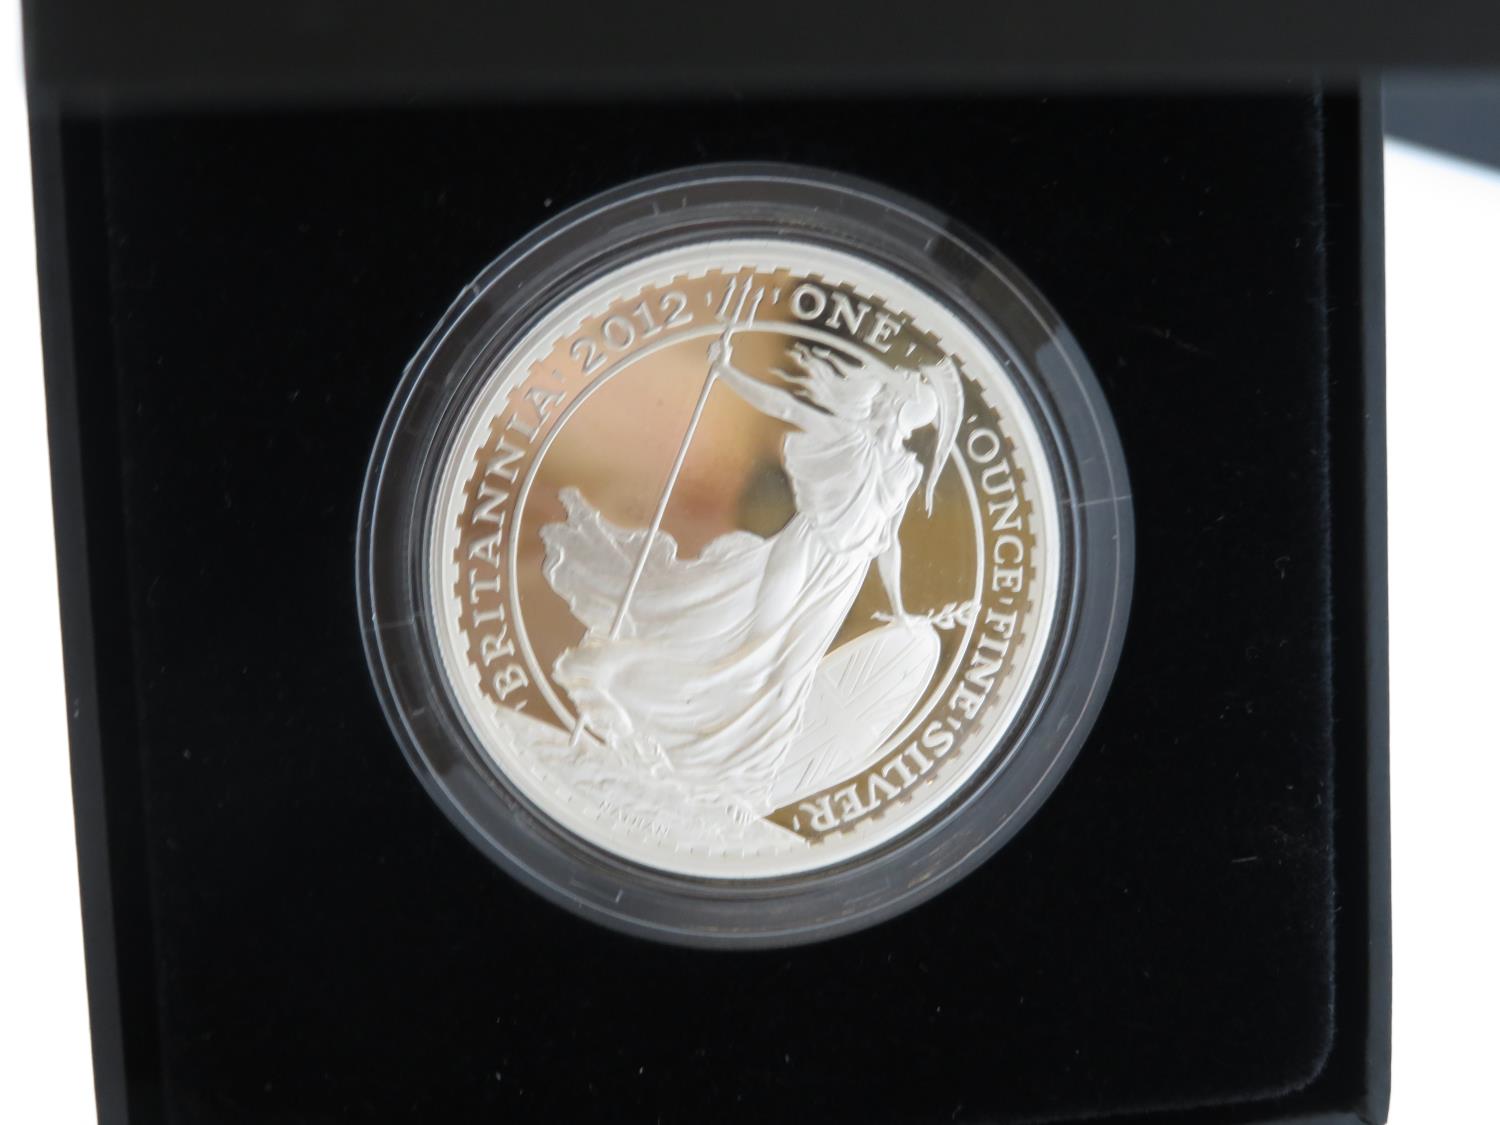 2012 Britannia silver proof 1oz coin in case with certificate - Image 2 of 2